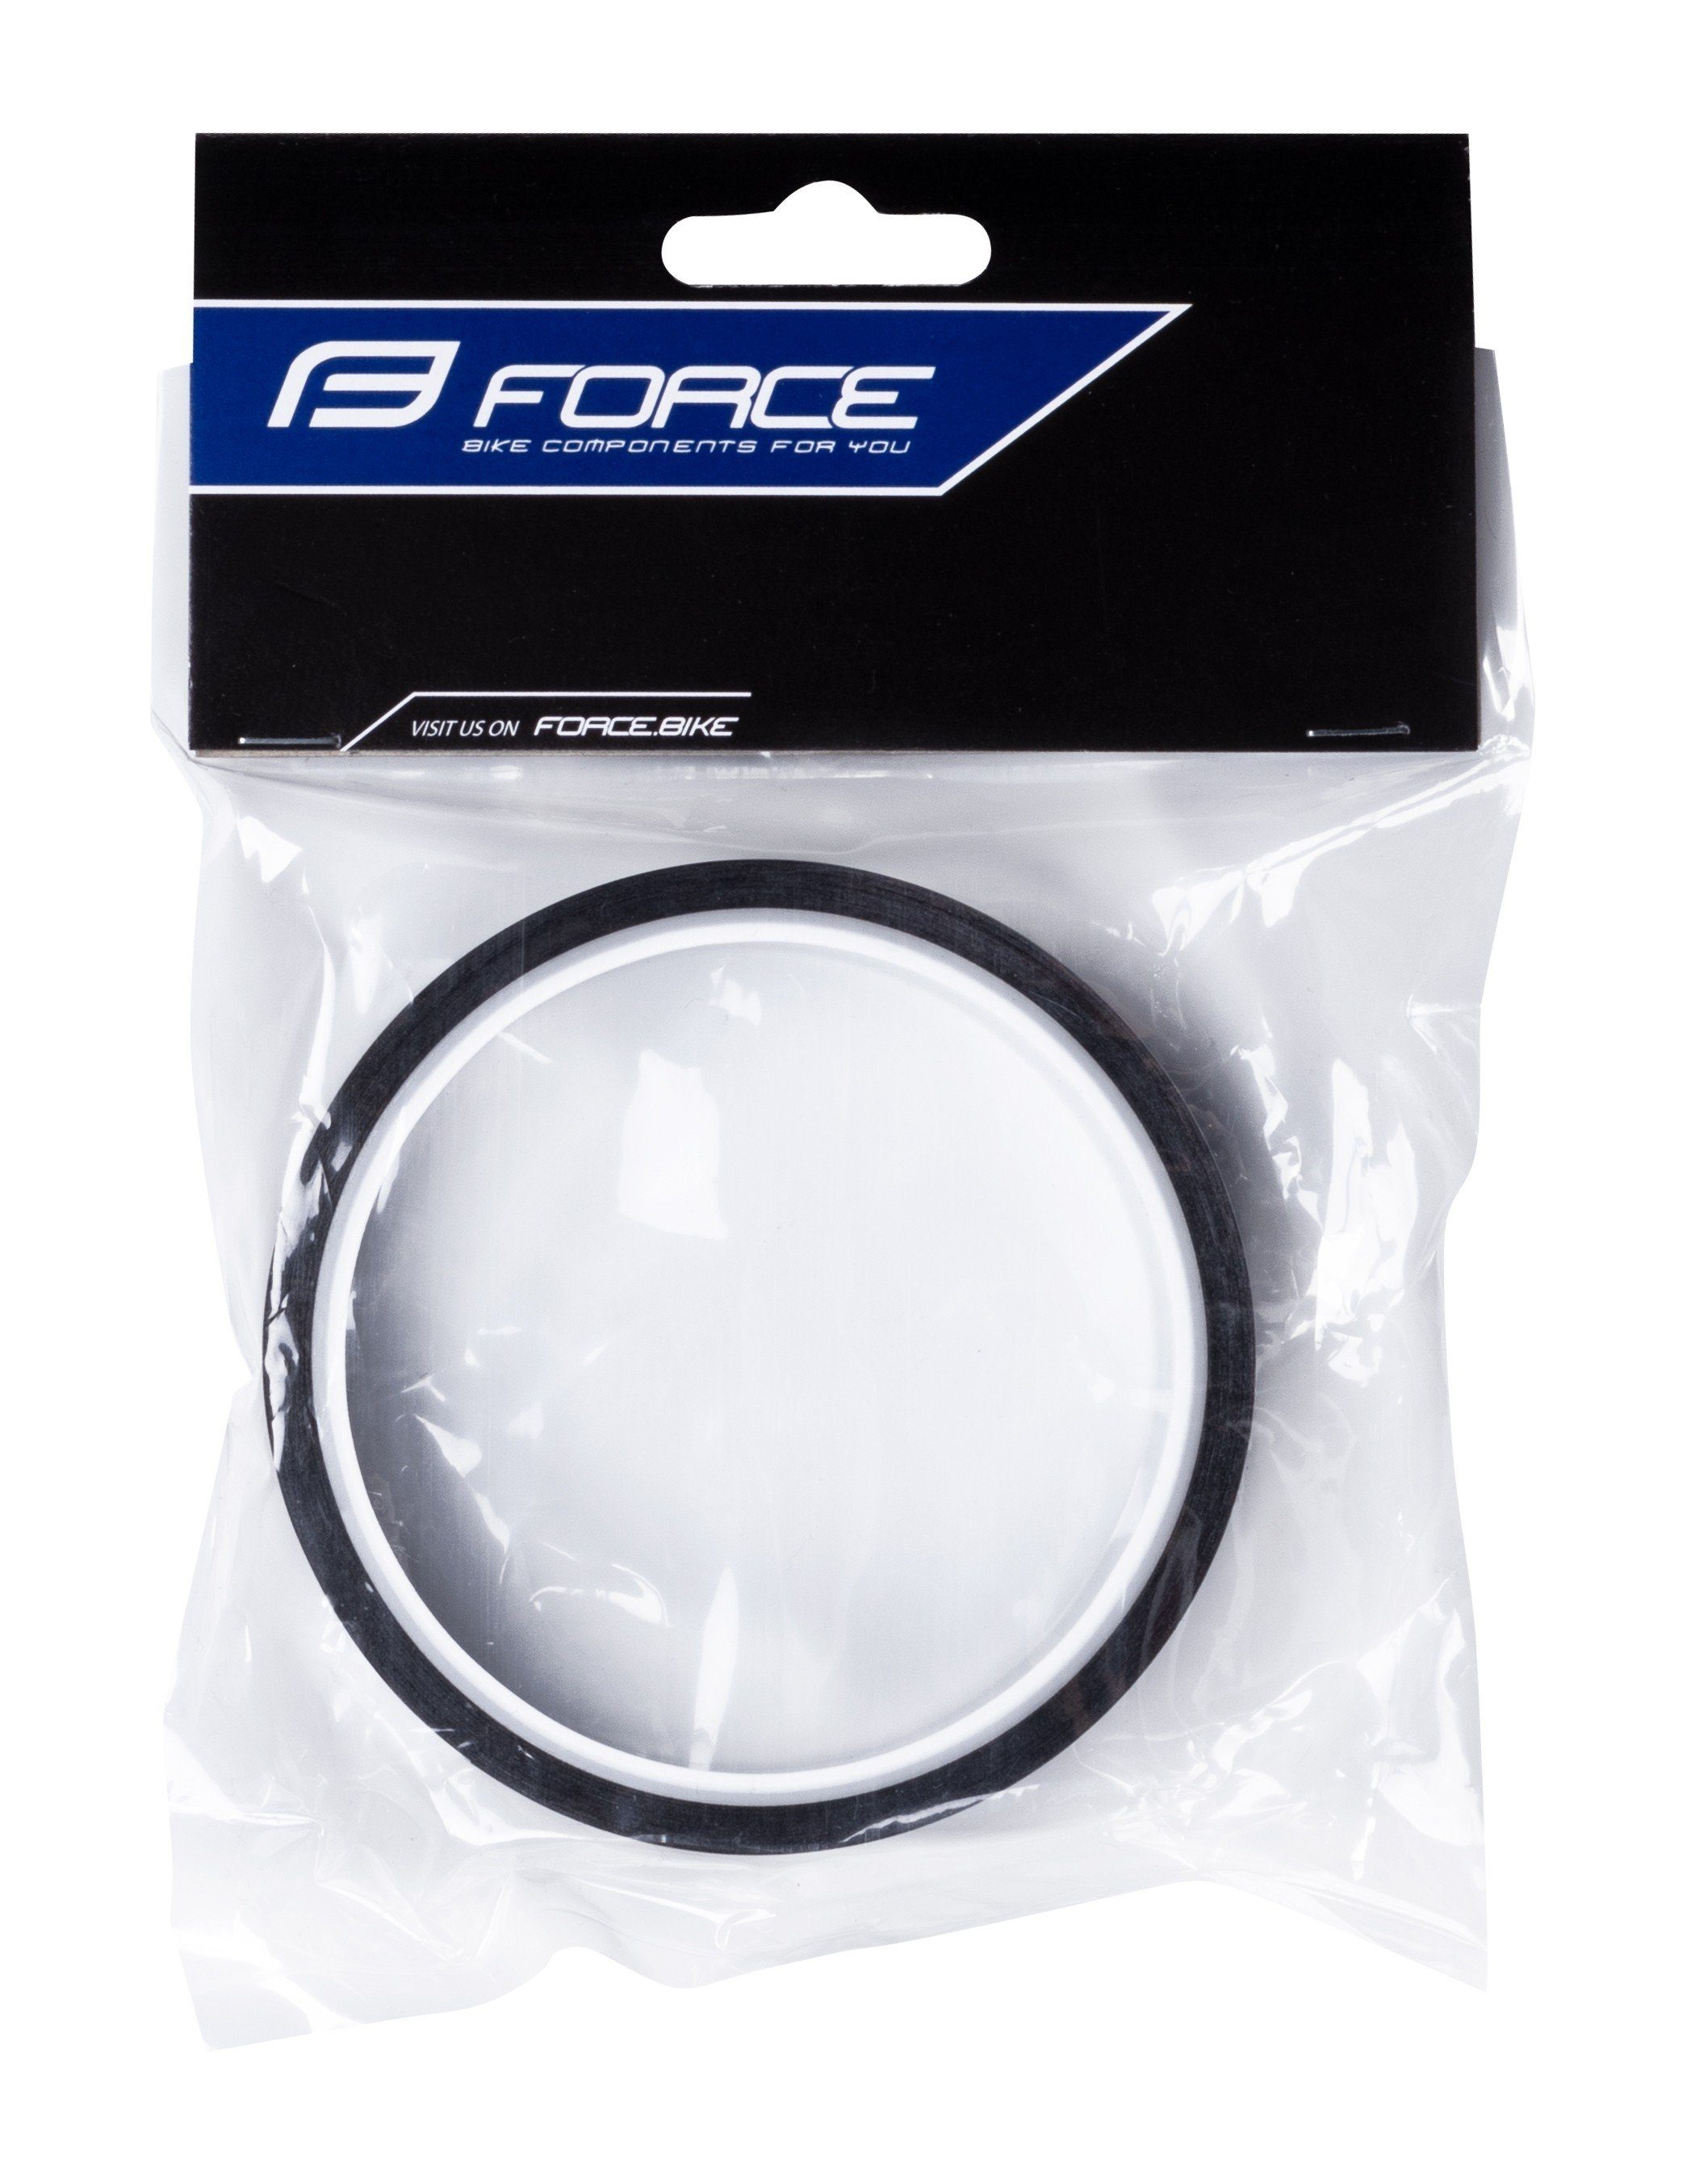 FORCE Fahrradschlauch rim tape 25mm Tubeless x 10m FORCE self-adhesive